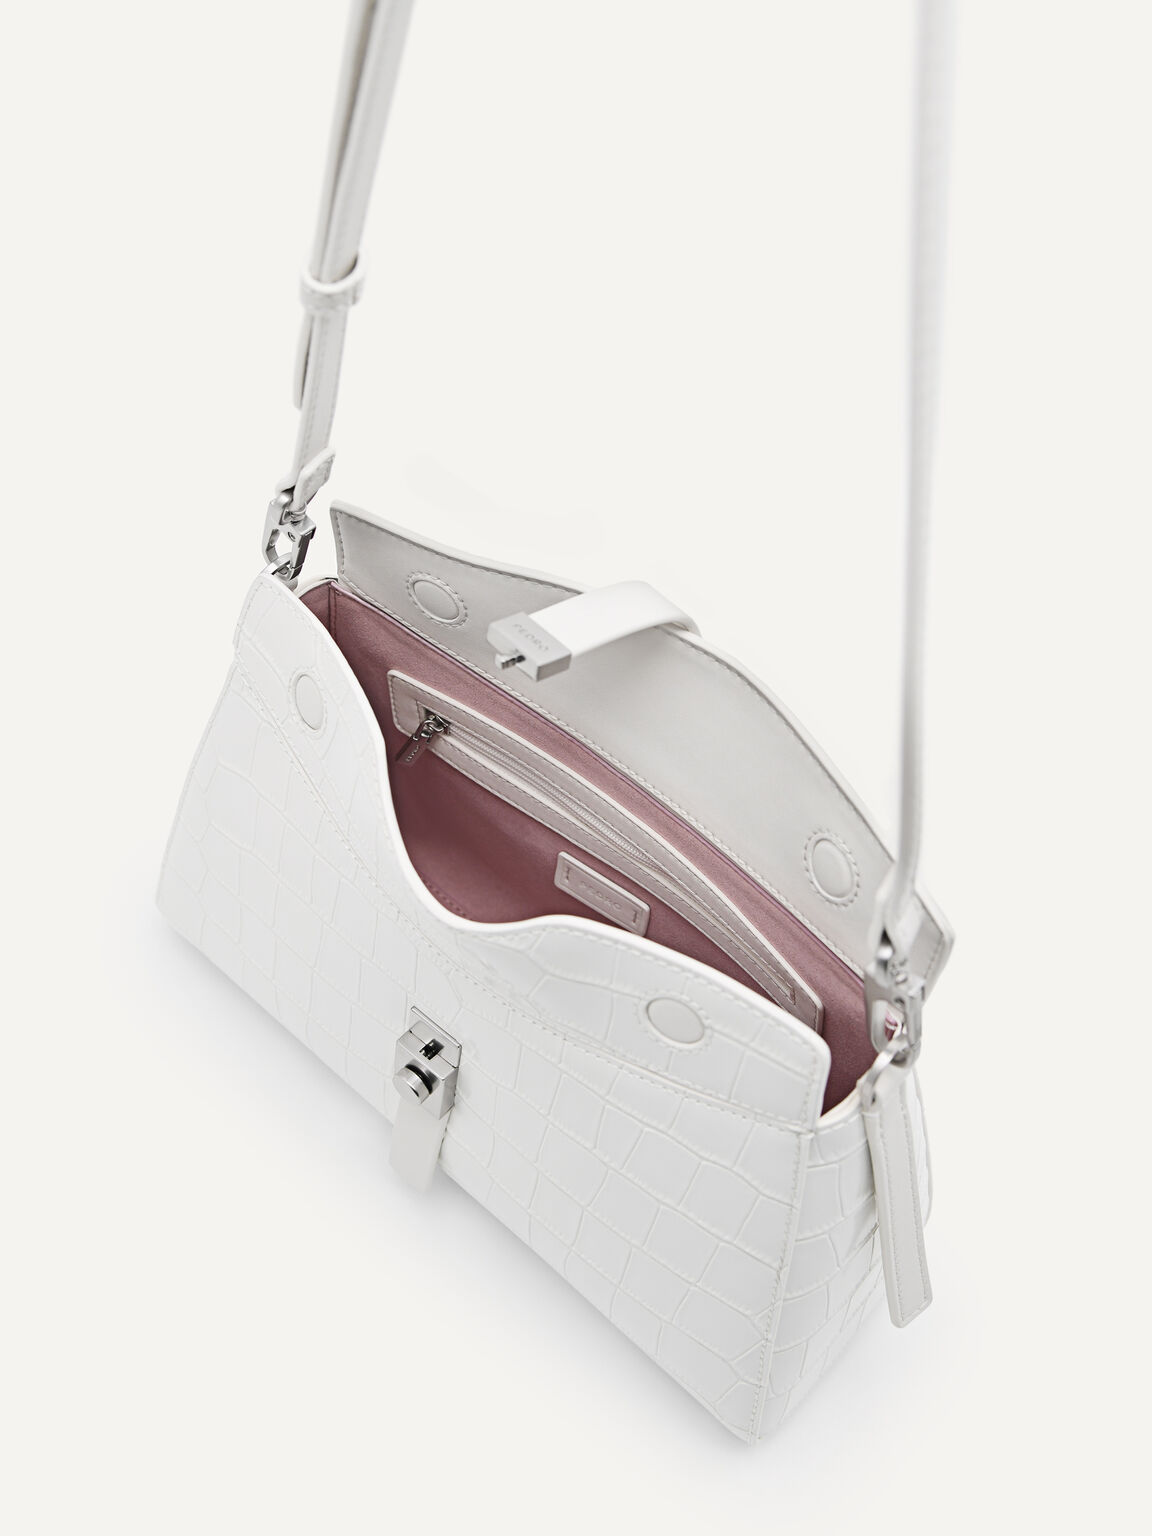 Leather Top Handle Bag, White